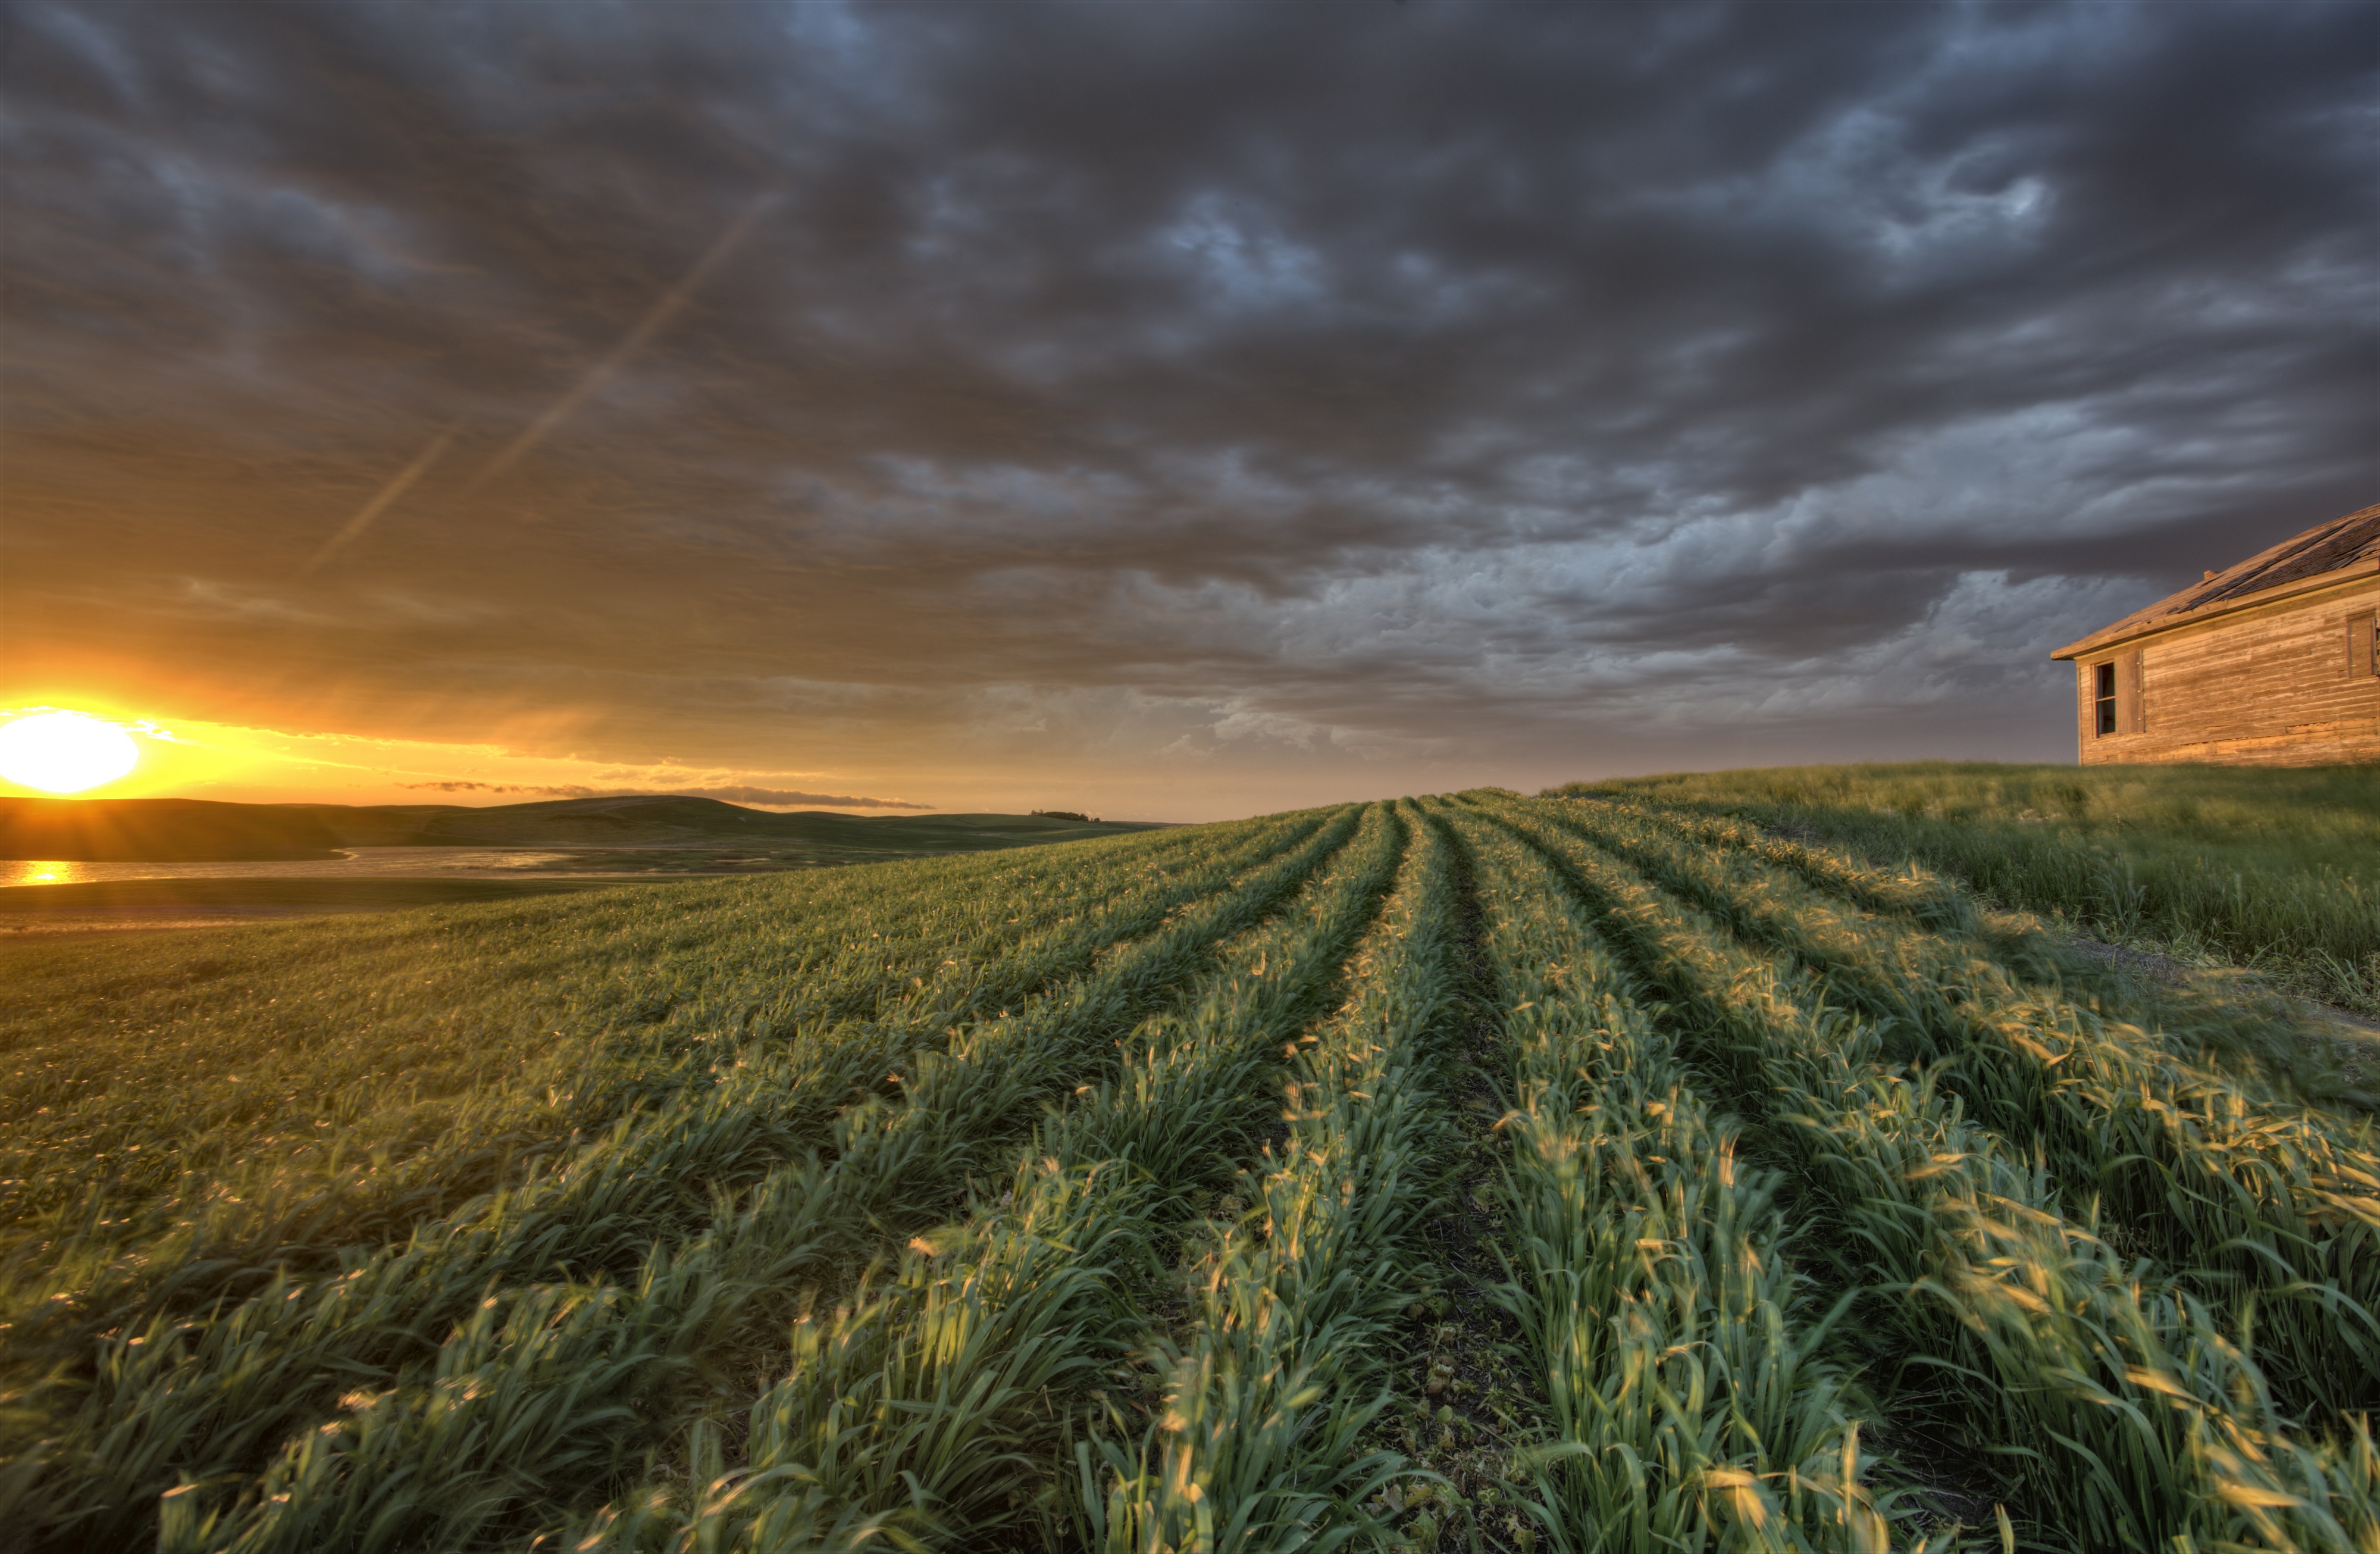 sunset and durum wheat crop storm clouds